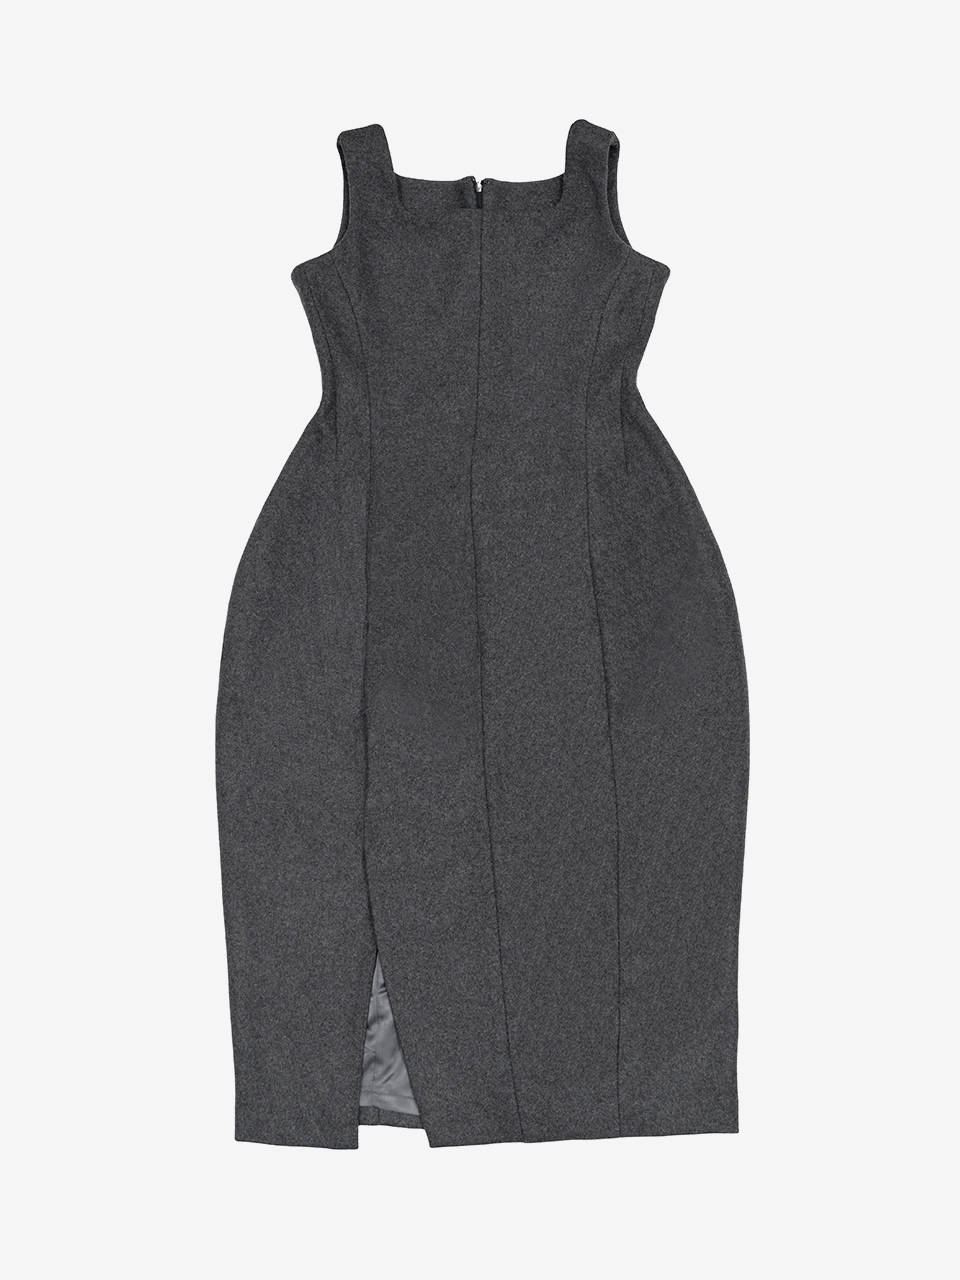 COCOON DRESS - CHARCOAL